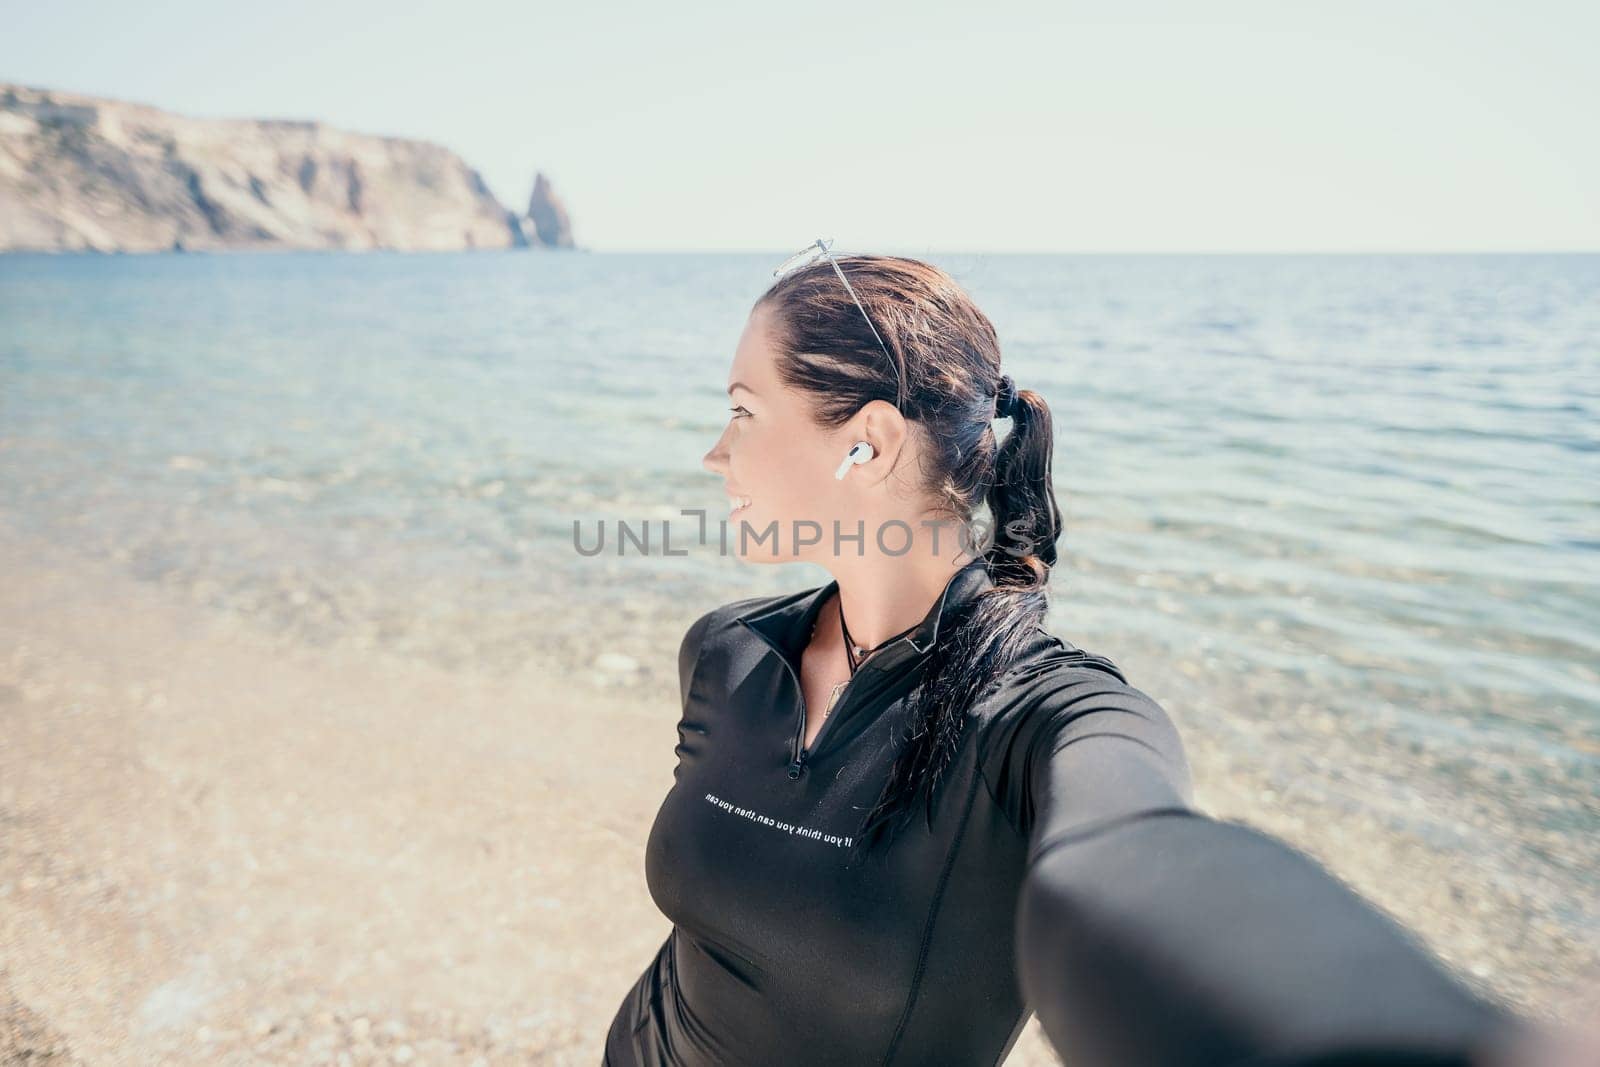 Woman travel sea. Young Happy woman posing on a beach near the sea on background of volcanic rocks, like in Iceland, sharing travel adventure journey